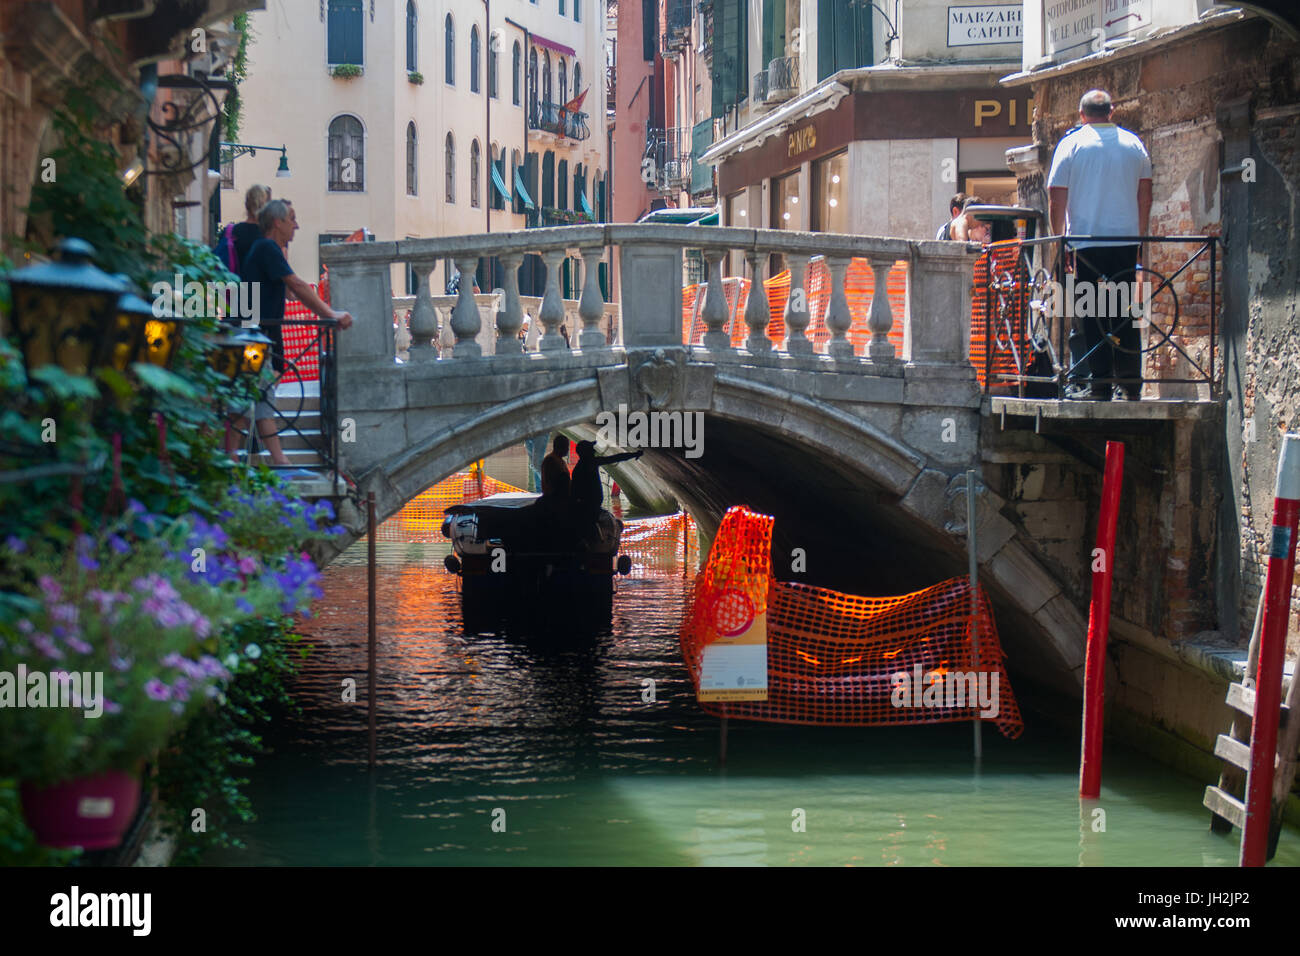 Venice, Italy. 12th July, 2017. Tourists search an alternative way to reach St. Mark square without passing through the 'Bareteri' bridge, at risk to collapse, on July 12, 2017 in Venice, Italy. The bridge of Bareteri, that is one of the main passages from Rialto bridge to St. Mark square, has been closed because of strong damages that could cause the fall of the bridge. © Simone Padovani / Awakening / Alamy Live News Stock Photo